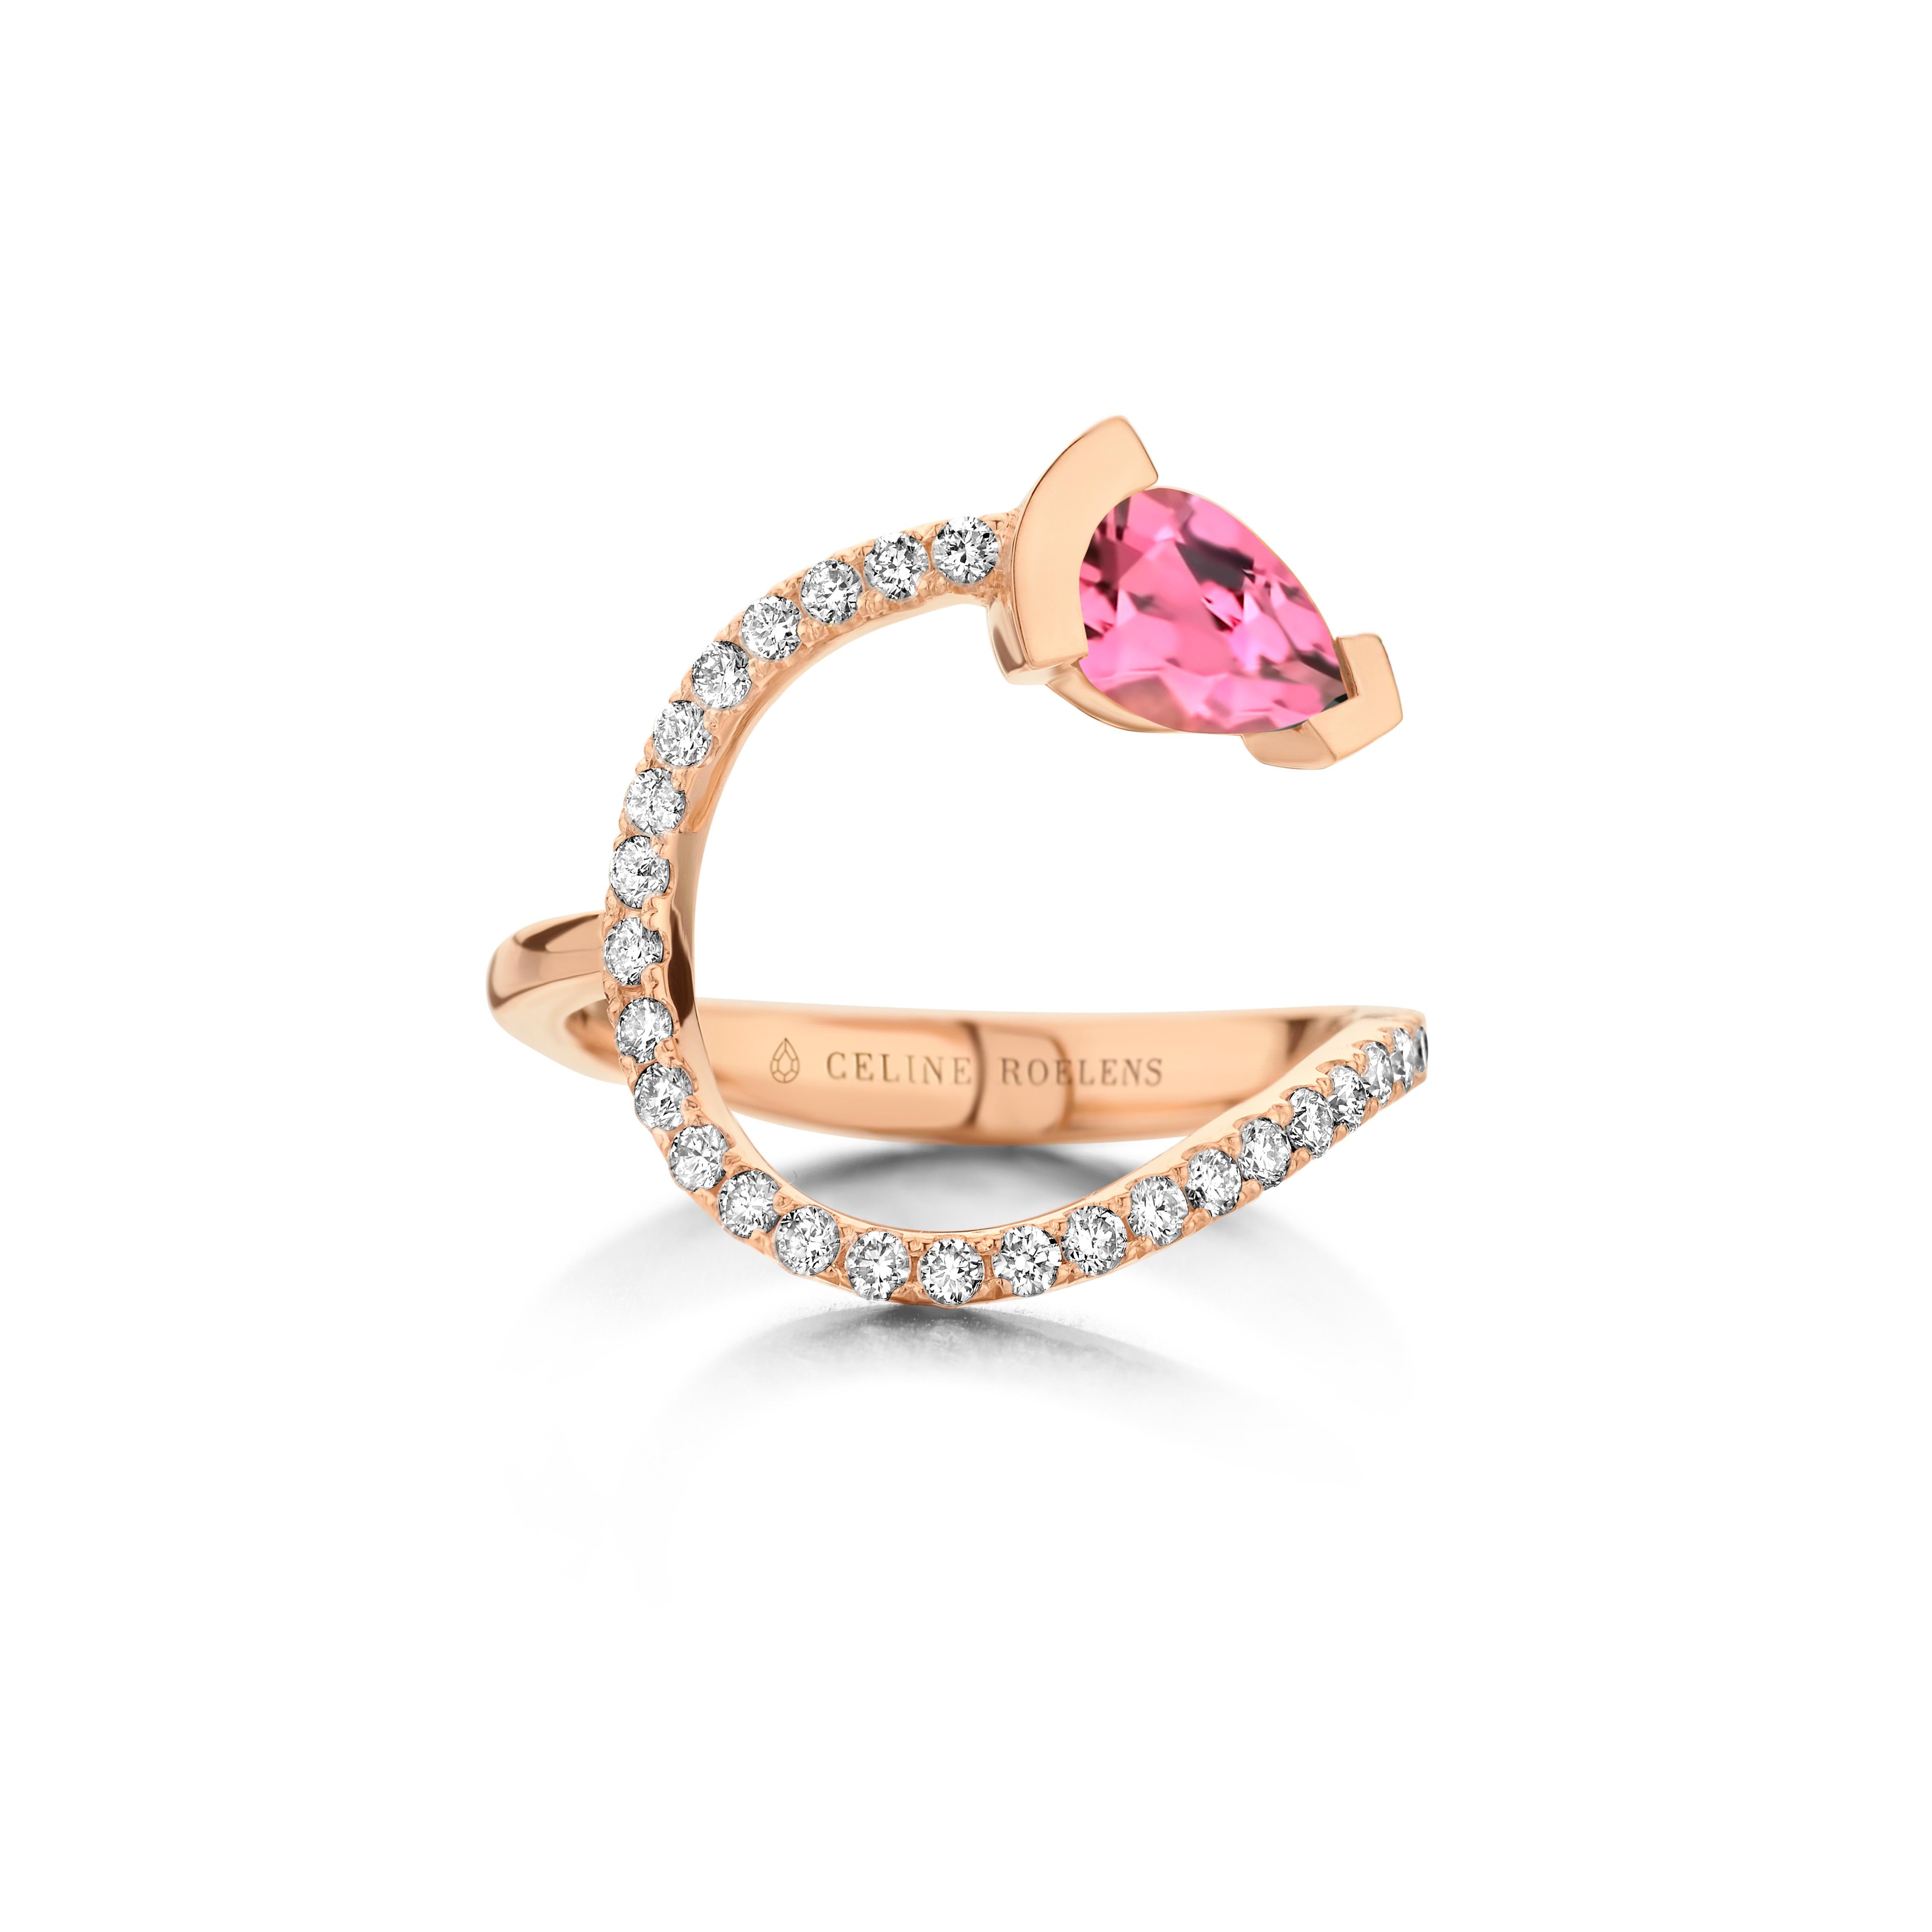 ADELINE curved ring in 18Kt white gold set with a pear shaped Pink tourmaline and 0,33 Ct of white brilliant cut diamonds - VS F quality.